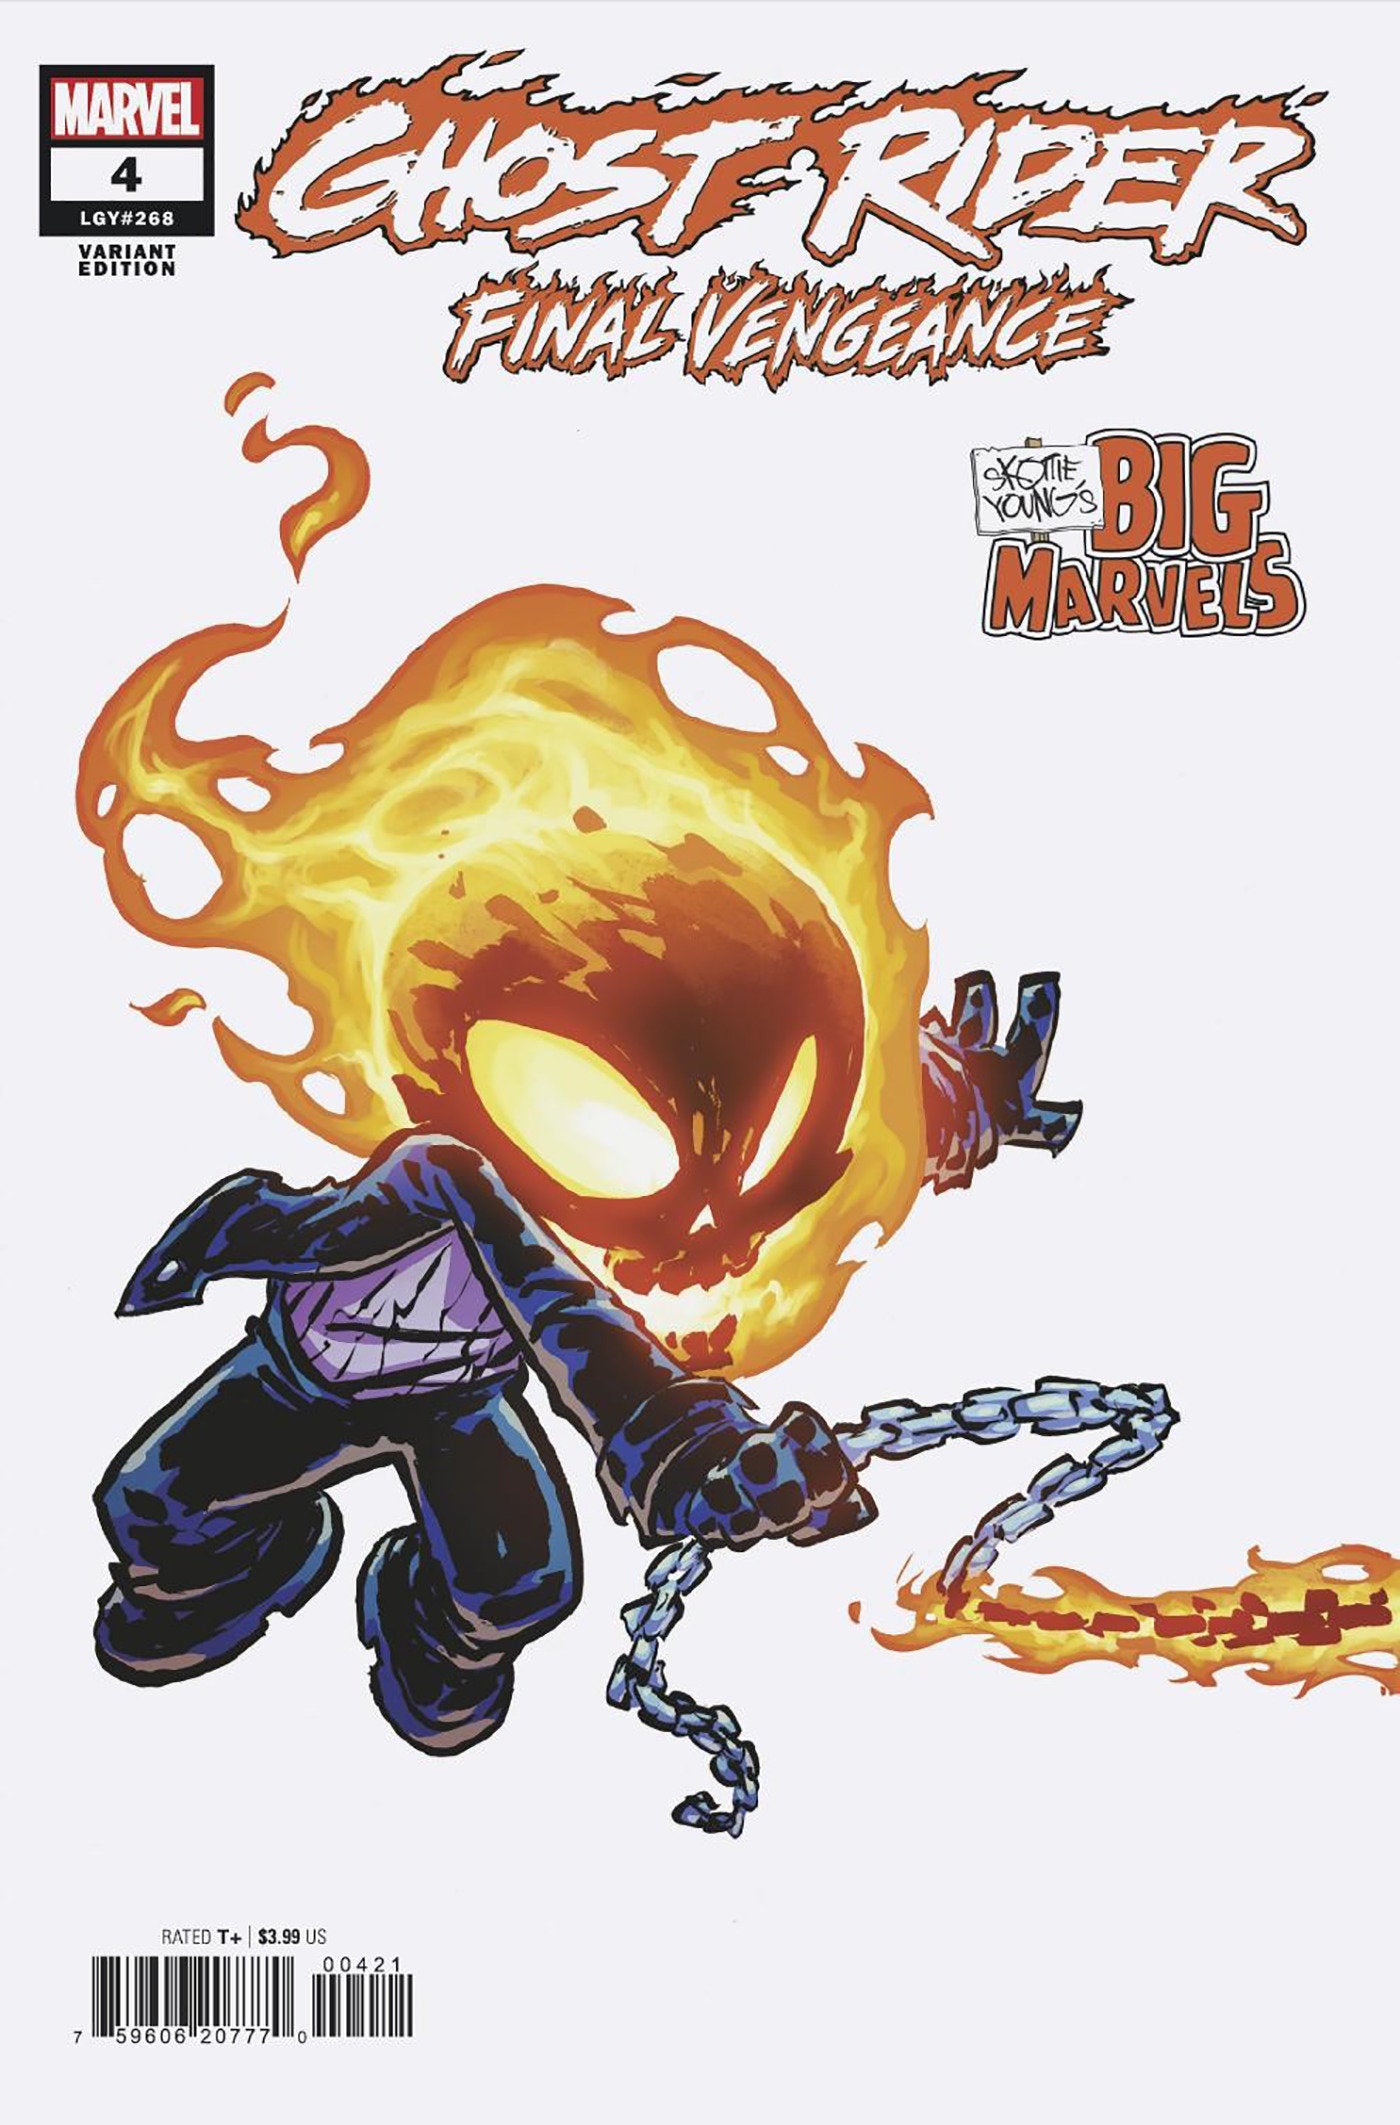 Ghost Rider: Final Vengeance #4 Skottie Young'S Big Marvel Variant | Game Master's Emporium (The New GME)